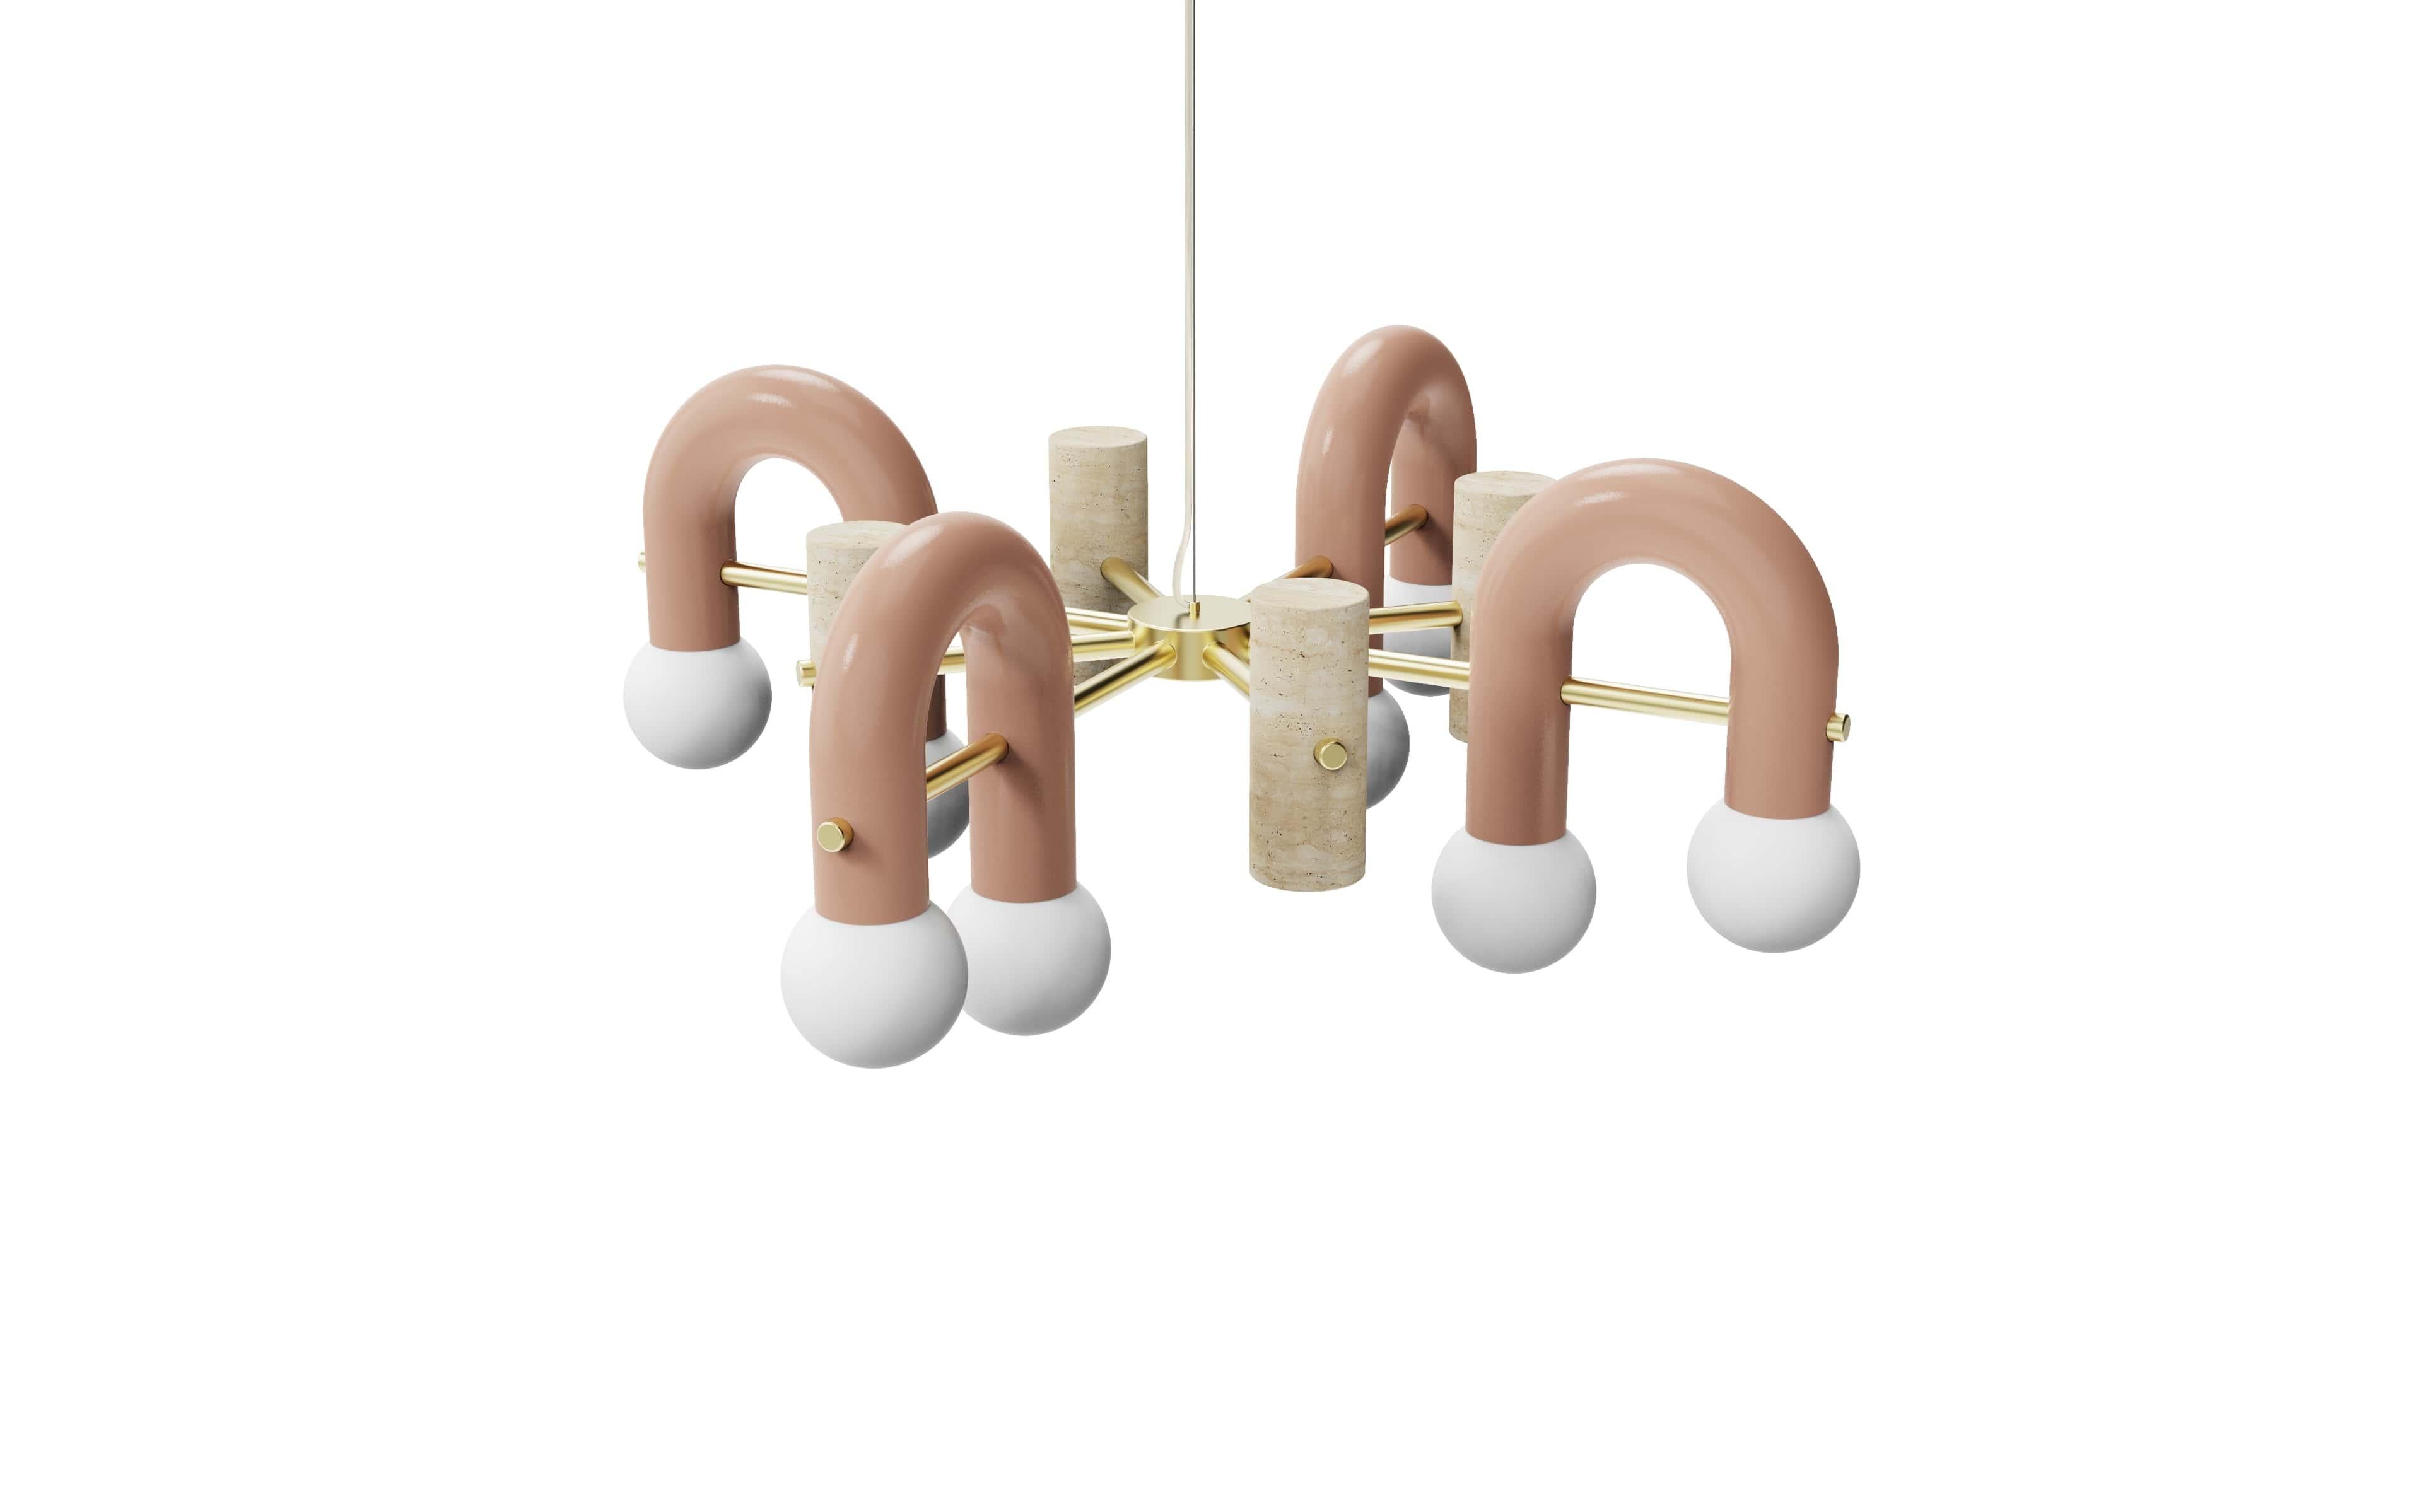 Brass Pyppe suspension lamp 100 by Utu Lamps
Dimensions: 36 x 100 x 100 cm
Materials: Lacquered metal, brass, nickel/copper, travertine

All our lamps can be wired according to each country. If sold to the USA it will be wired for the USA for